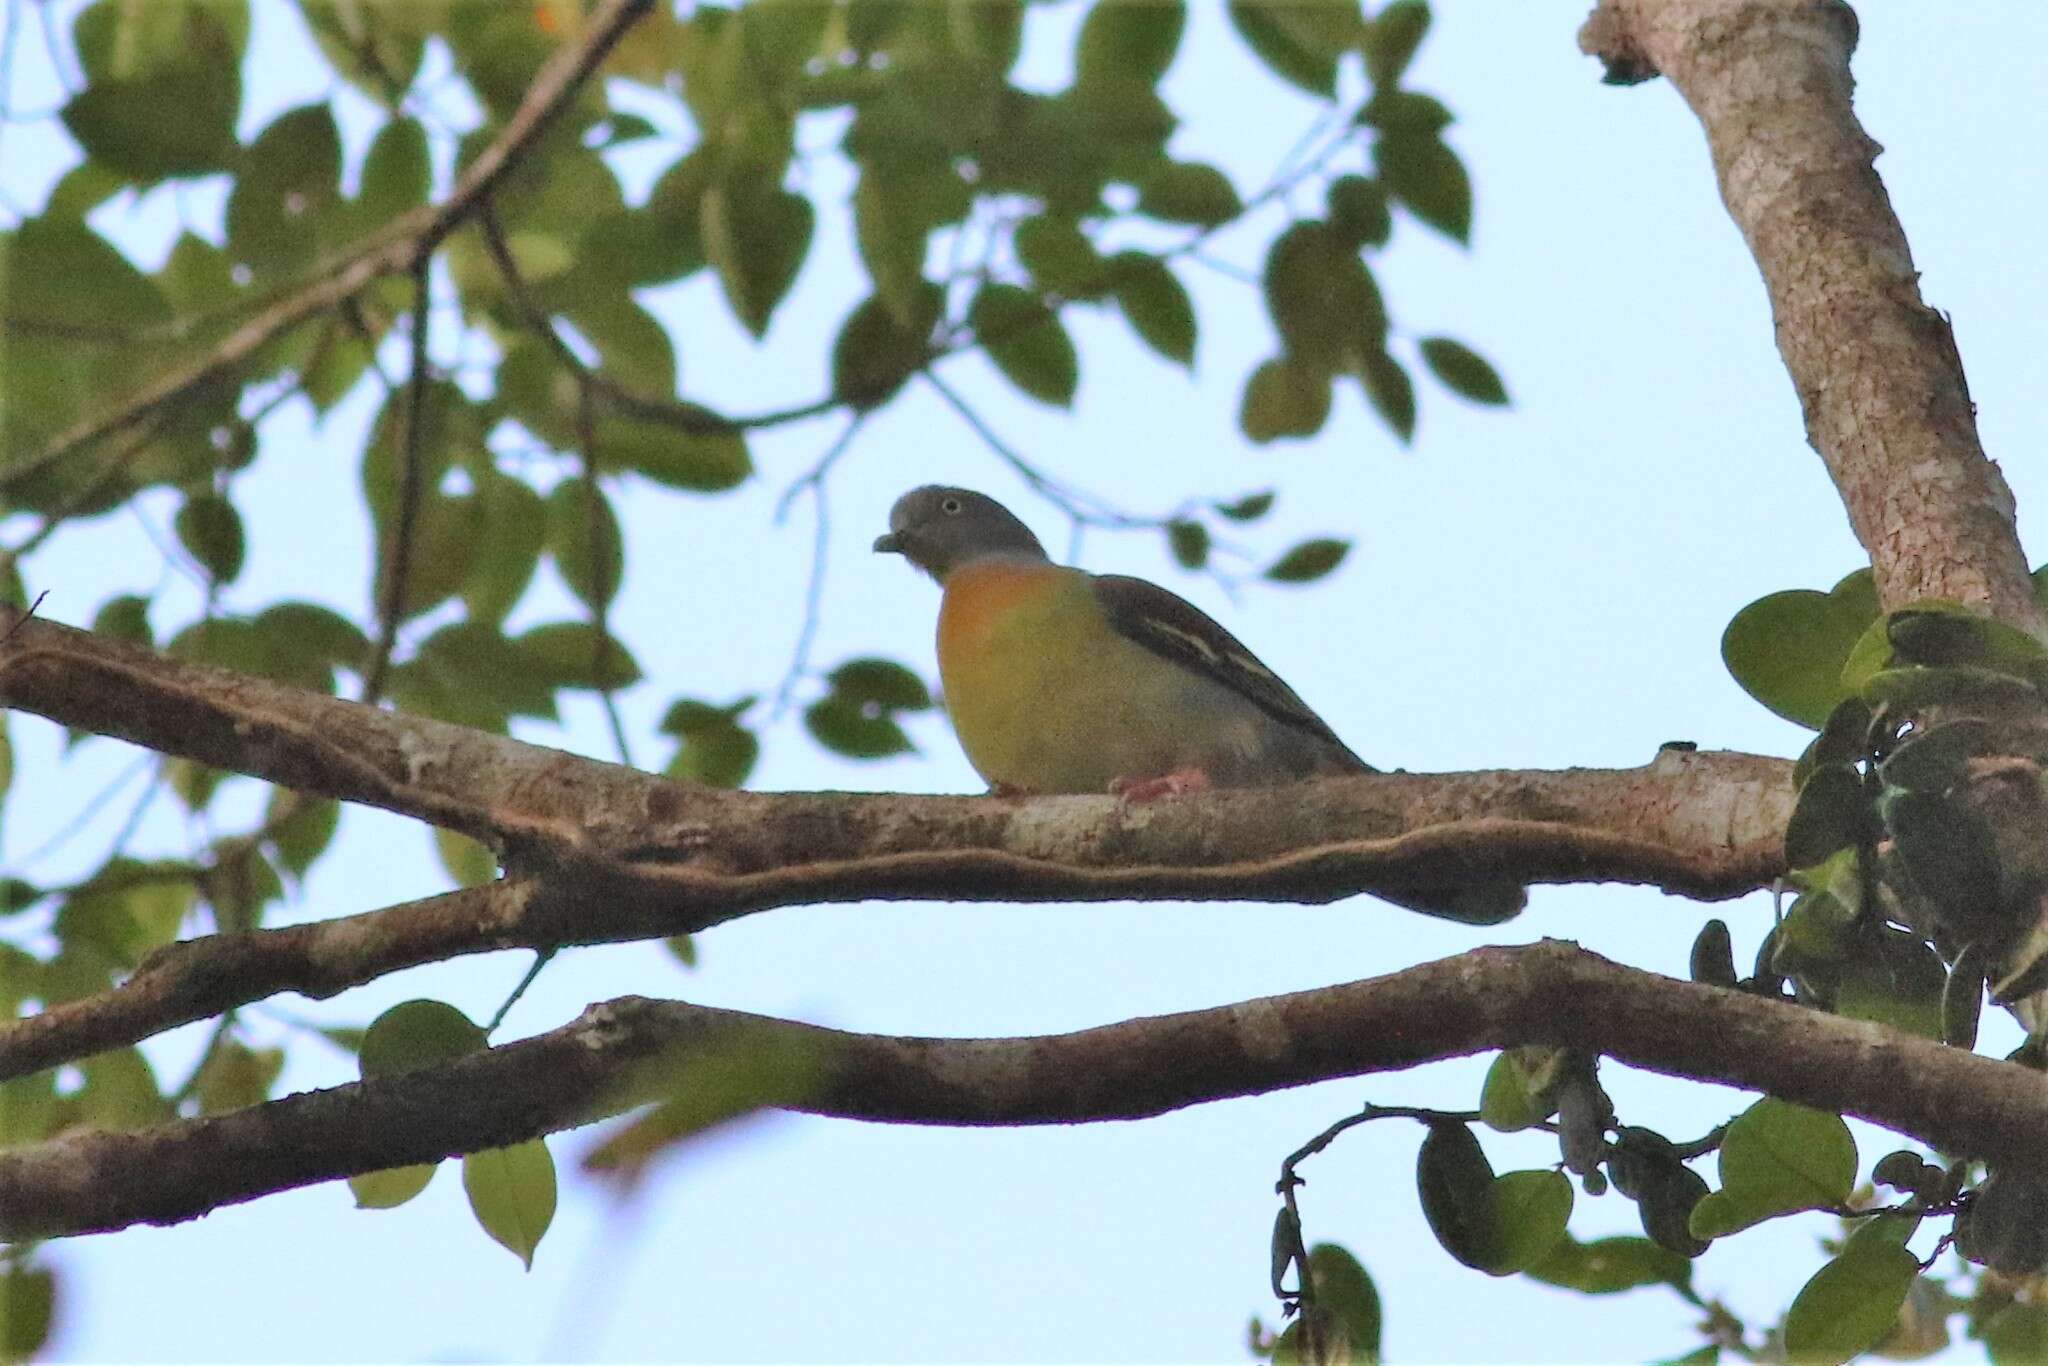 Image of Little Green Pigeon